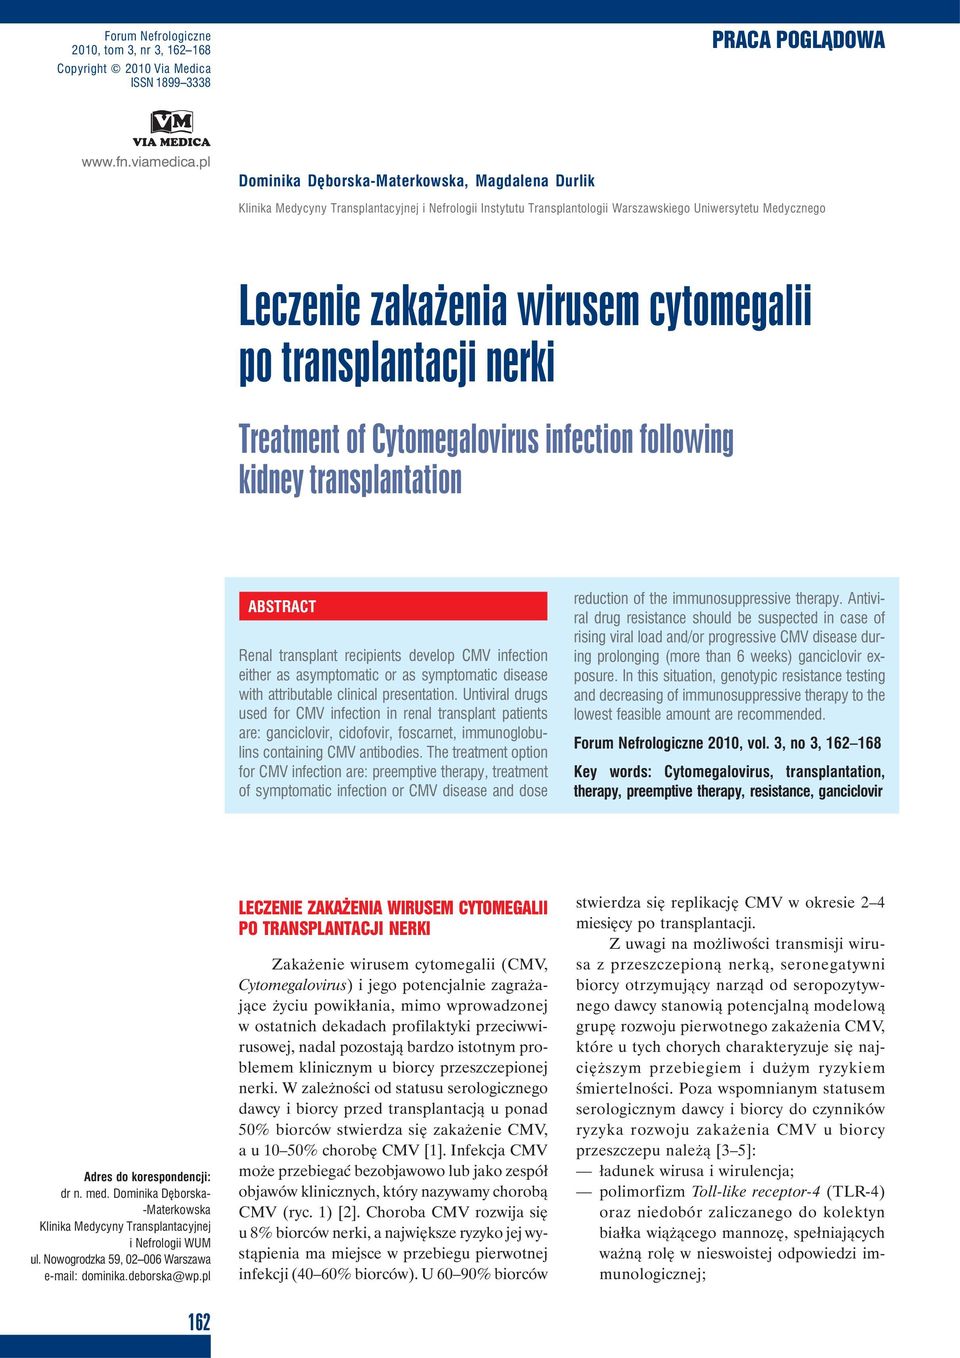 cytomegalii po transplantacji nerki Treatment of Cytomegalovirus infection following kidney transplantation ABSTRACT Renal transplant recipients develop CMV infection either as asymptomatic or as